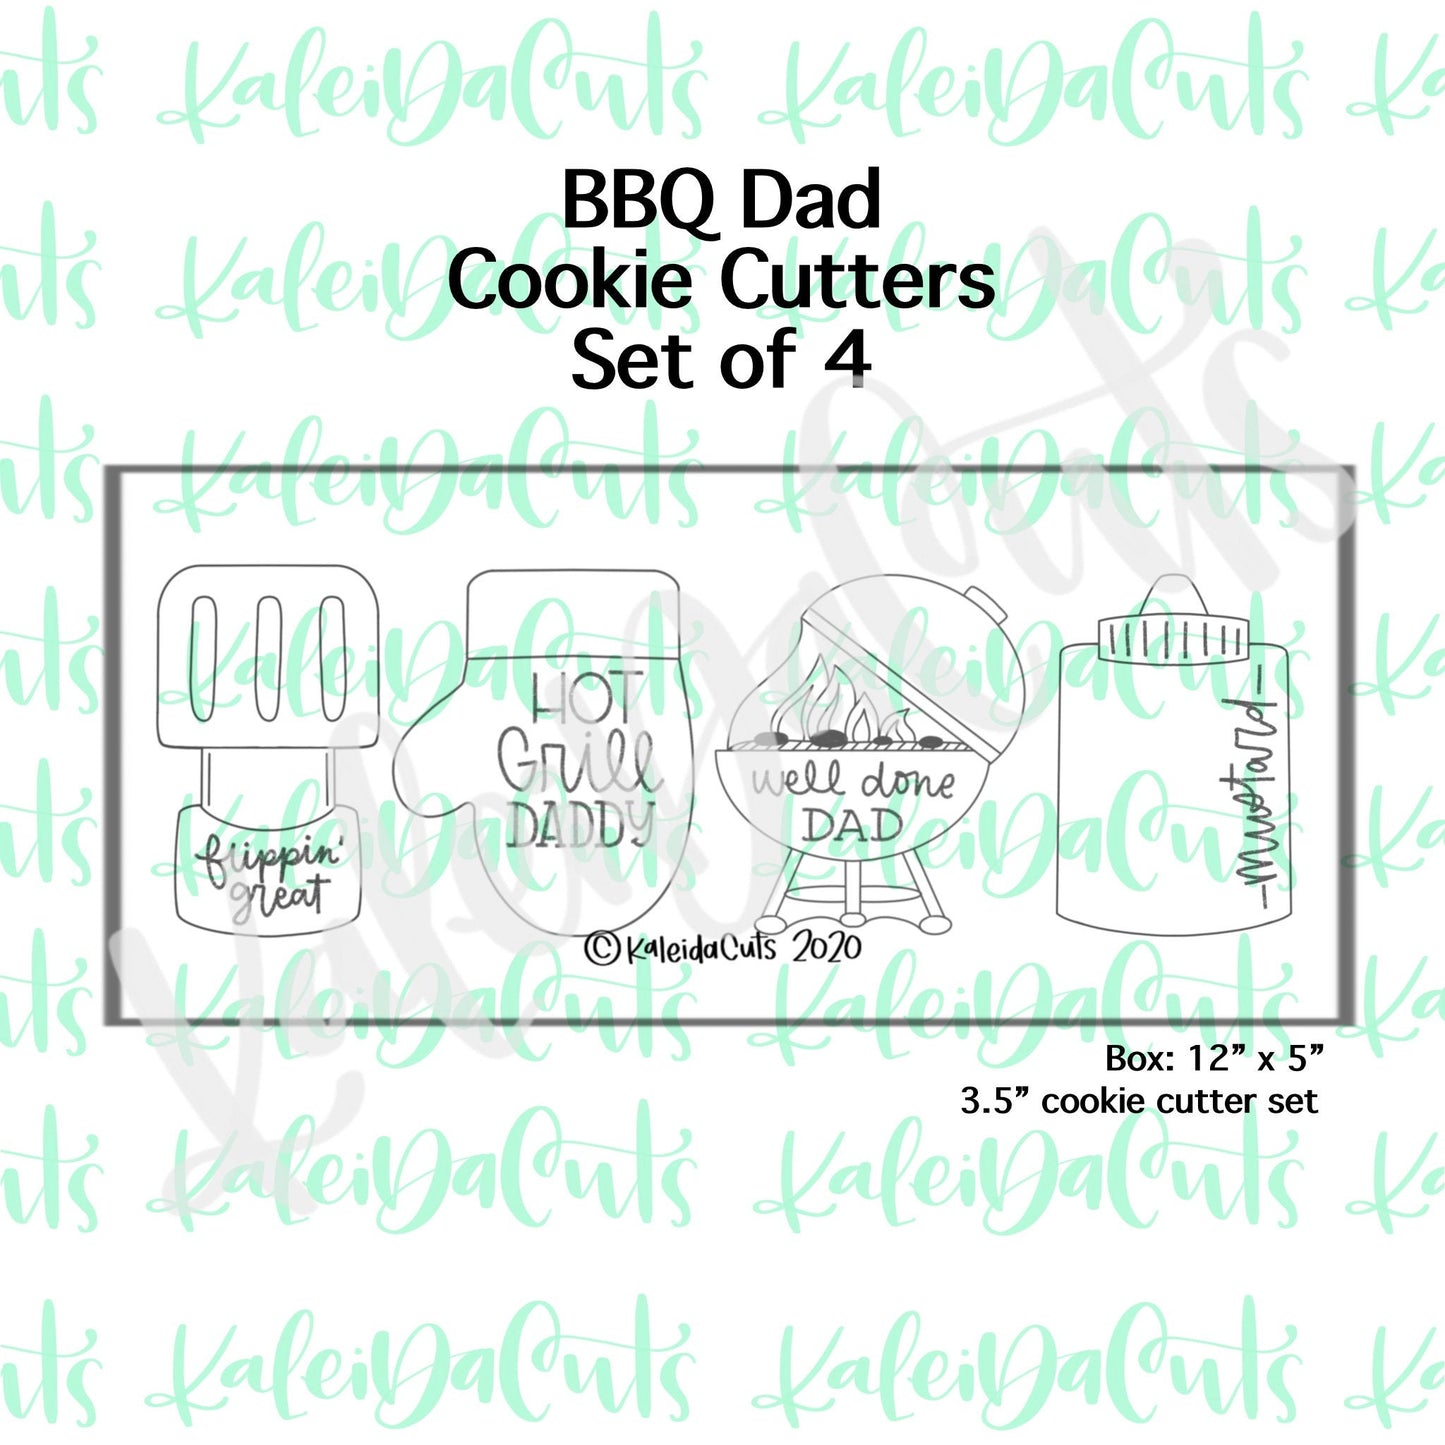 BBQ Dad Cookie Cutters Set of 4